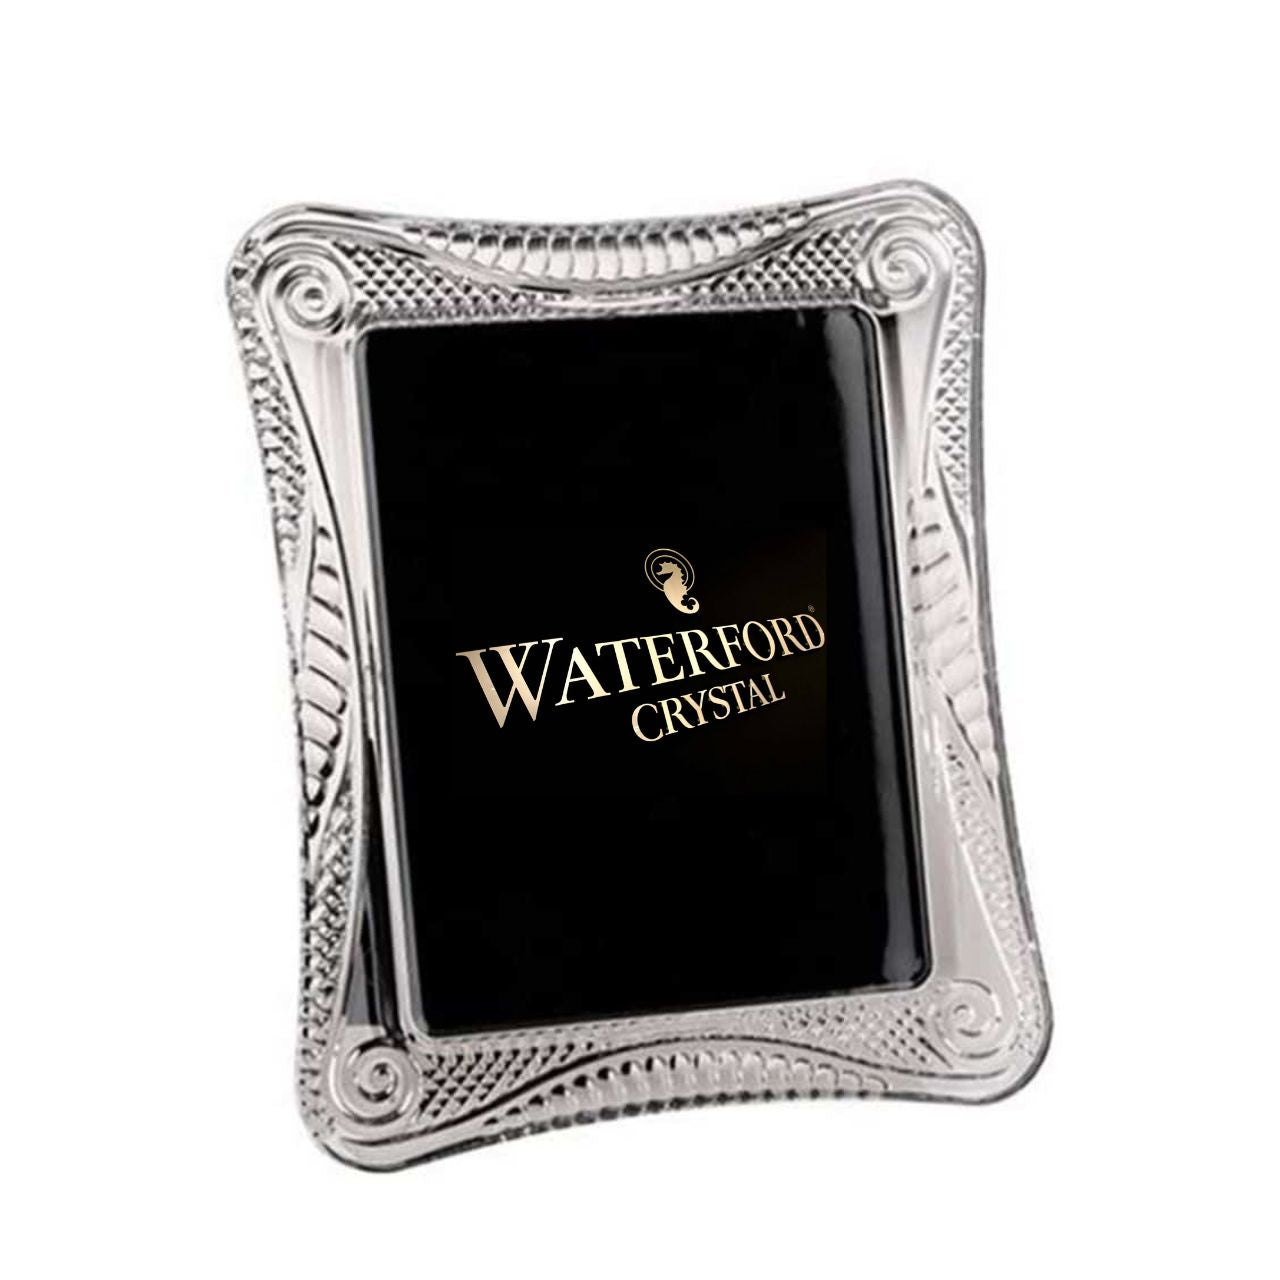 Waterford Crystal Seahorse 8 x 10 Picture Frame  Seahorse 8x10 Picture Frame is part of Waterford's second edition Classic Crystal Collection. This extra-large, upright rectangular picture frame employs the seahorse design elements evocatively without becoming illustrative.